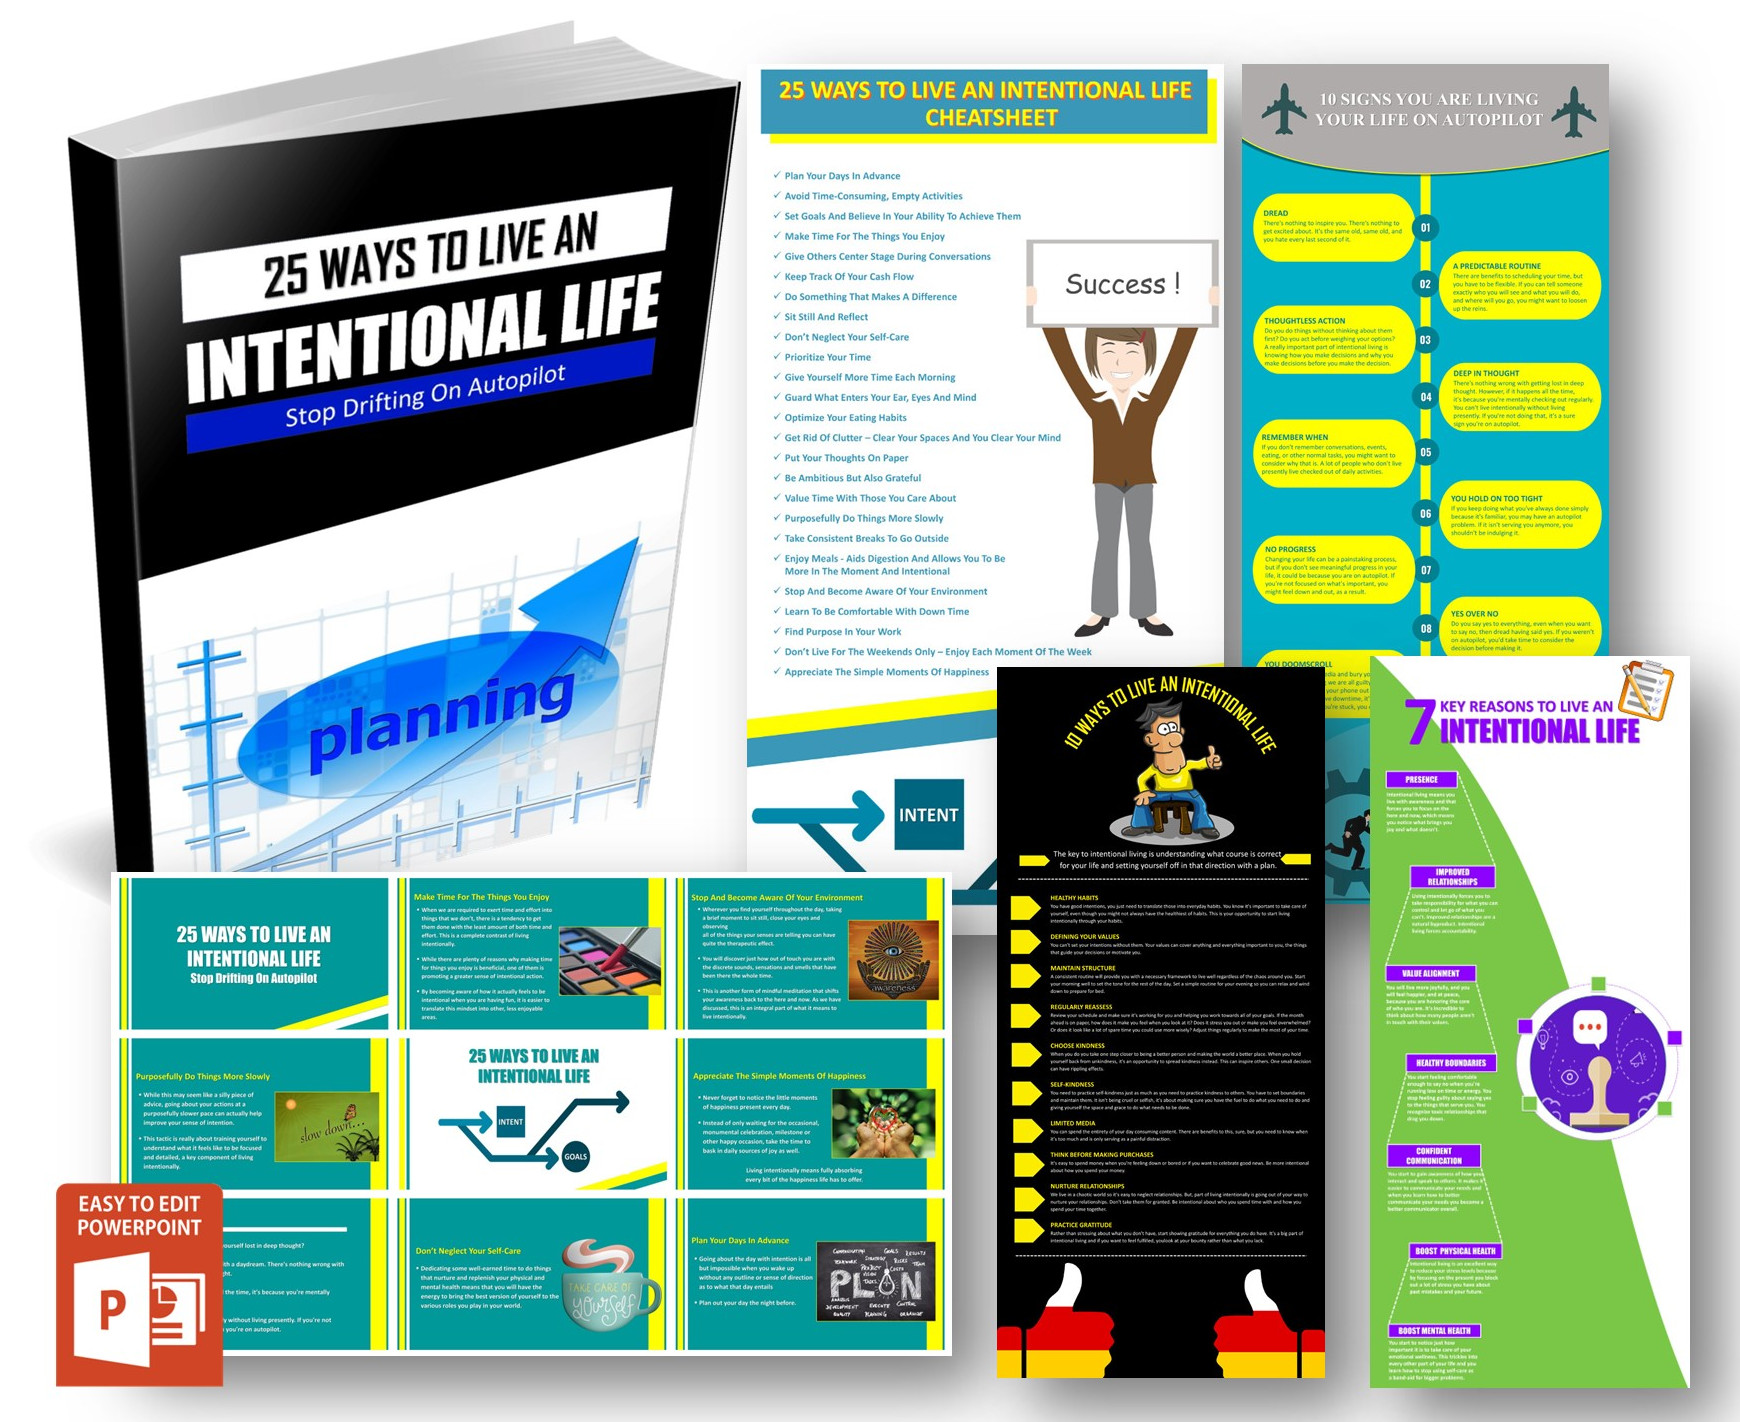 Living An Intentional Life Content With PLR Rights